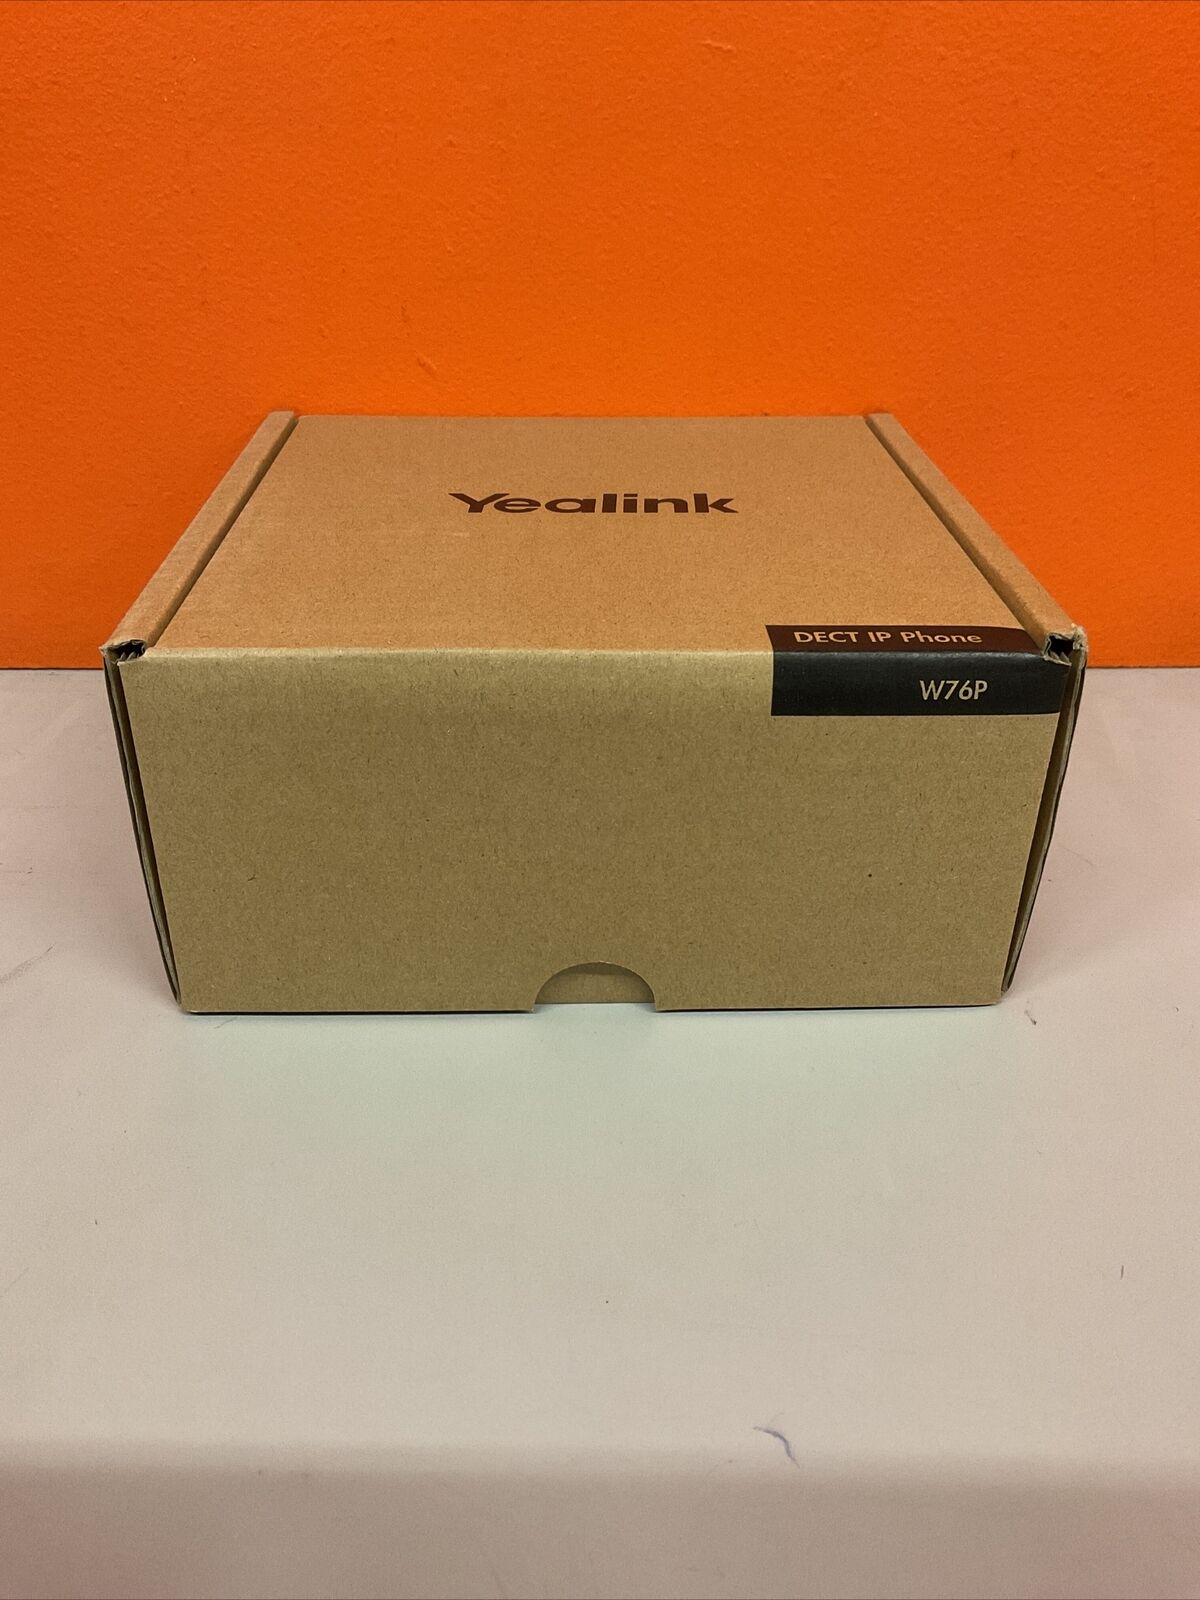 Yealink W76P DECT Phone System